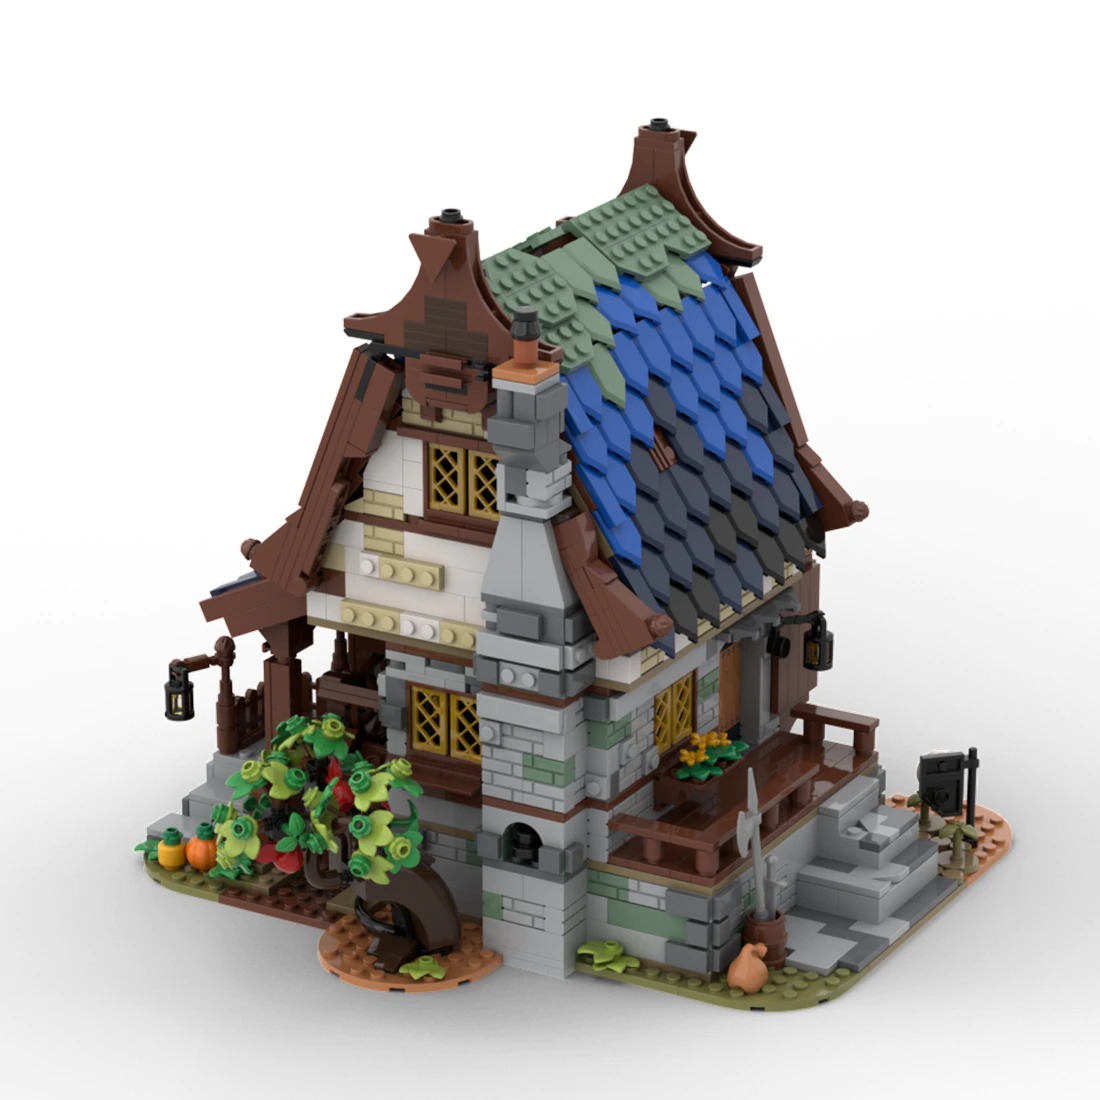 authorized moc 82443 medieval water mill main 3 - DECOOL